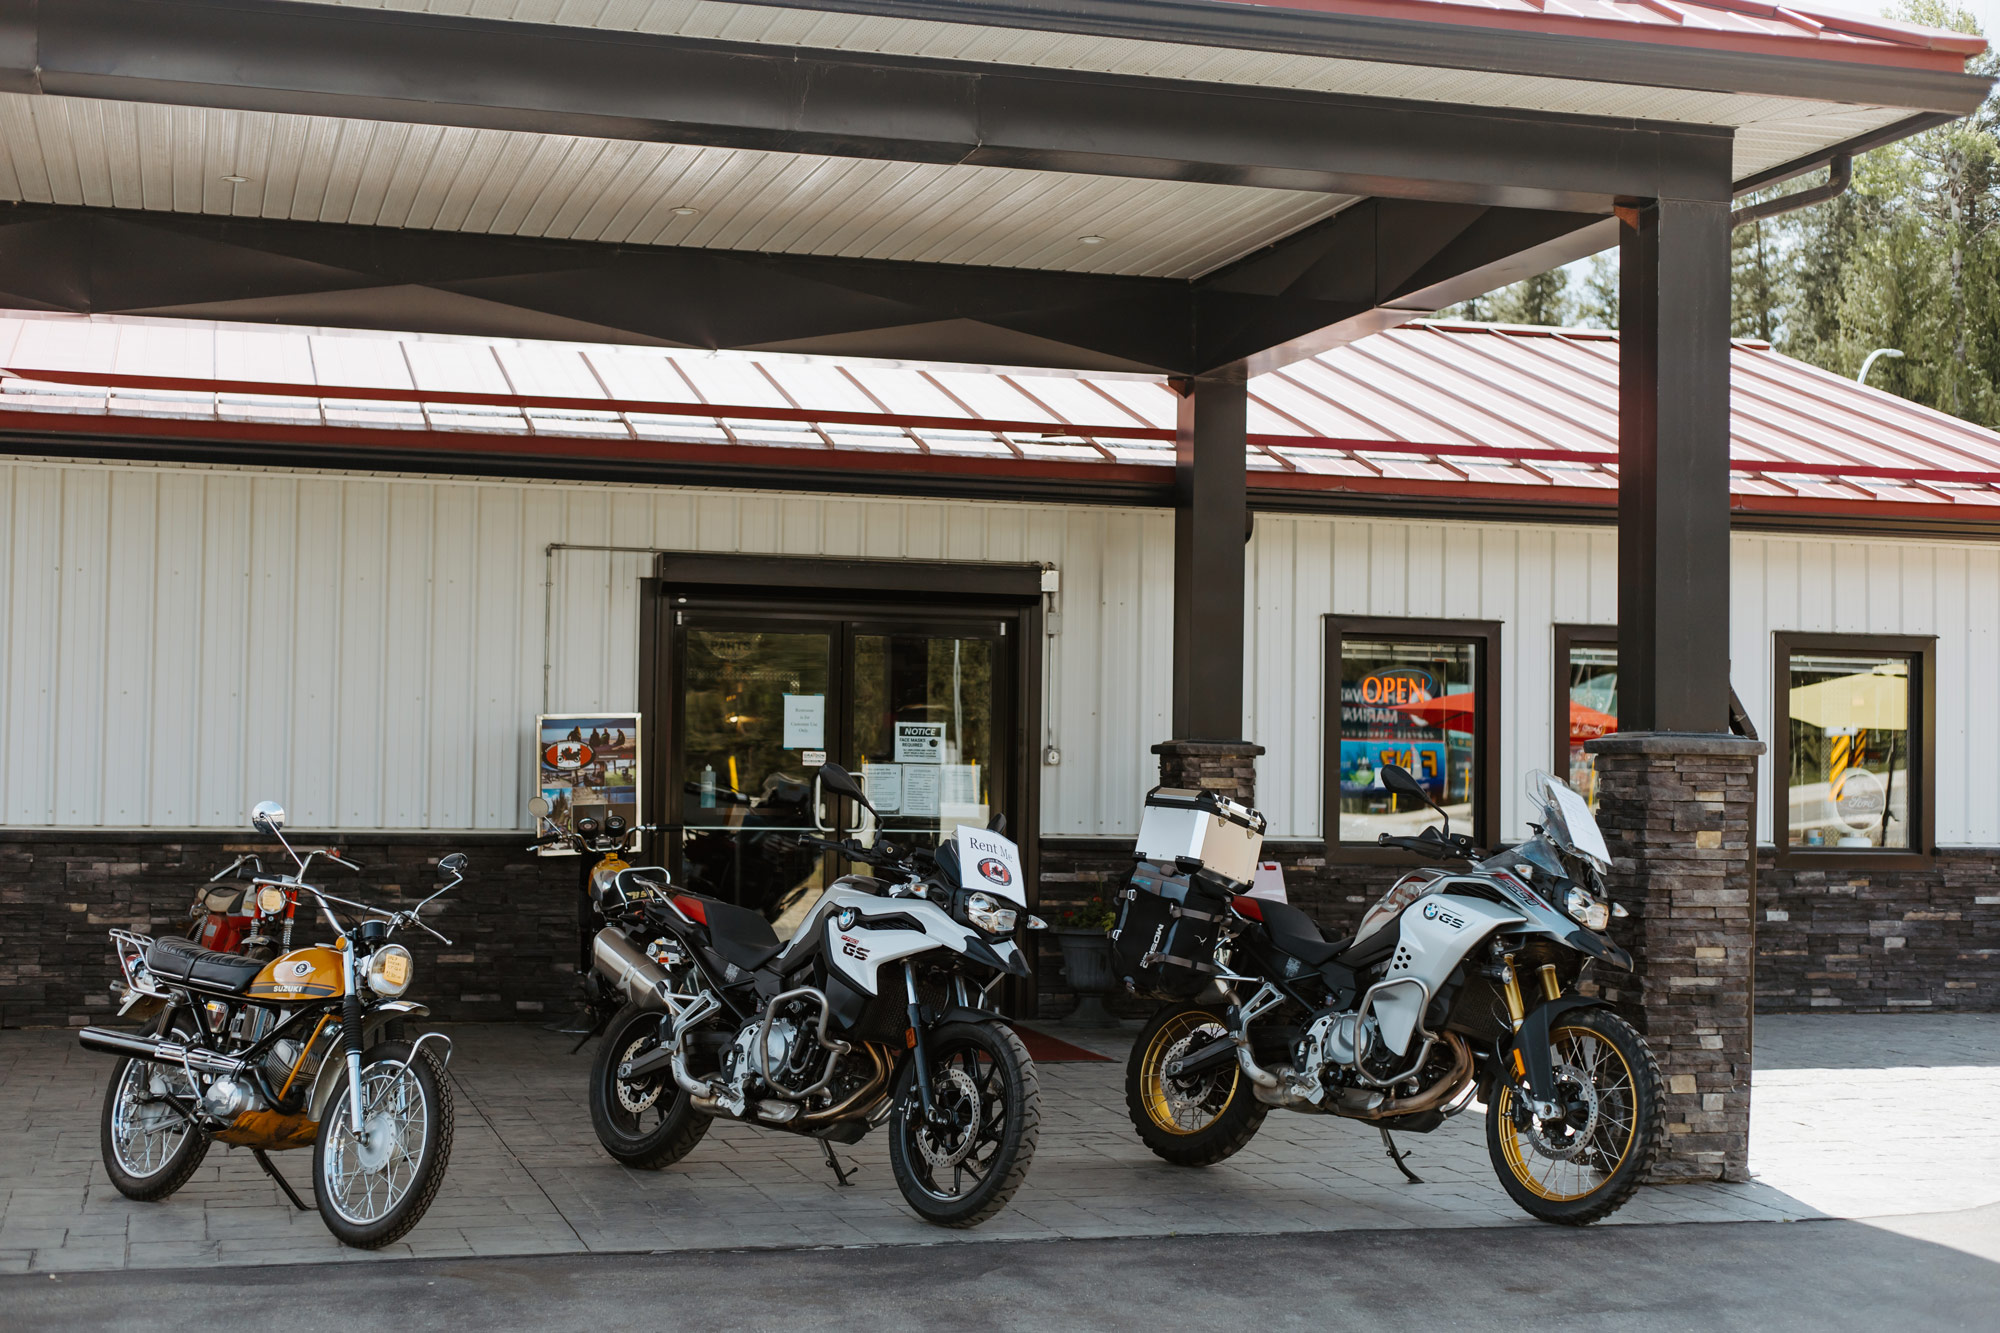 Dreamcycle Motorcycle Museum: A historical and fascinating motorcycle museum featuring a self guided audio tour, gift shop, surround sound theatre, motorcycle parts and classic bike exchange.